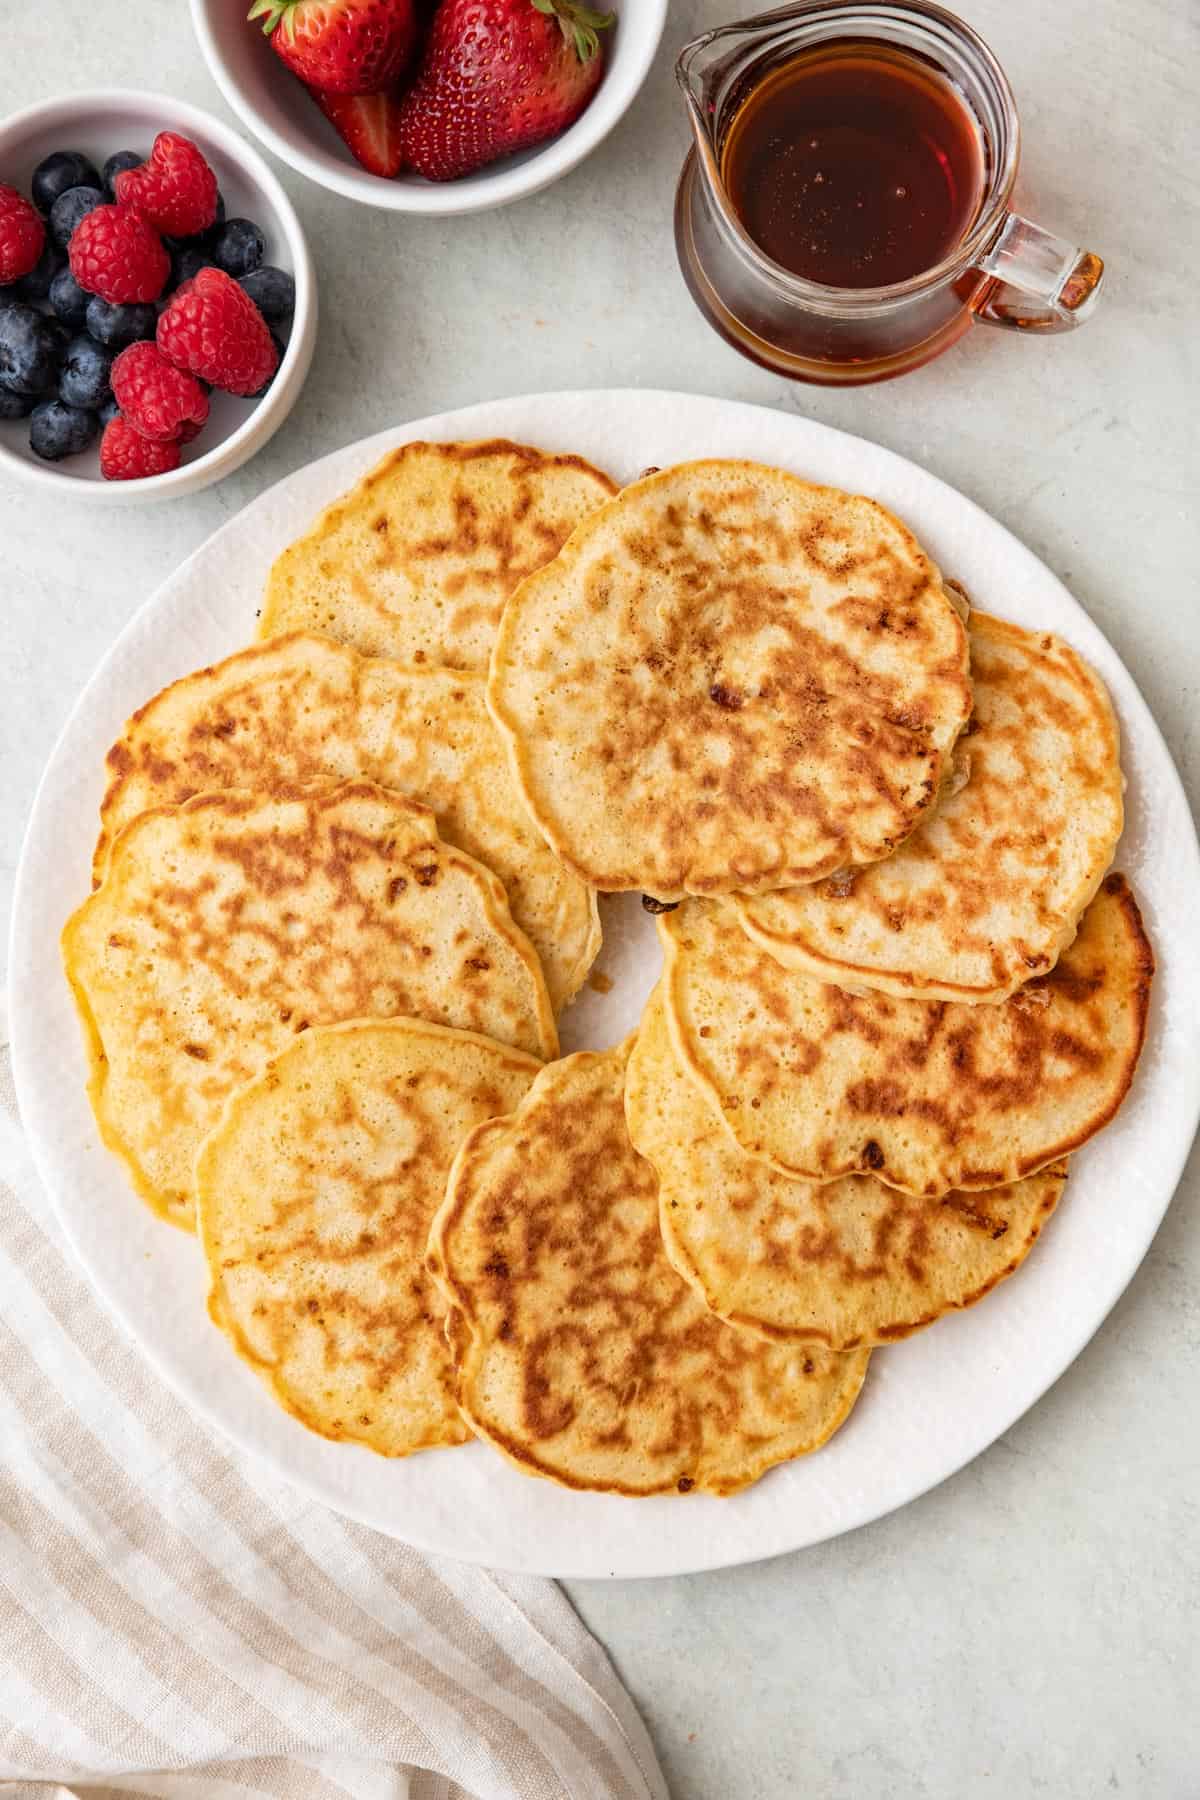 Cottage cheese pancakes layered in a circle overlapping each other on a round plate with two dishes of fresh berries and a side of maple syrup.